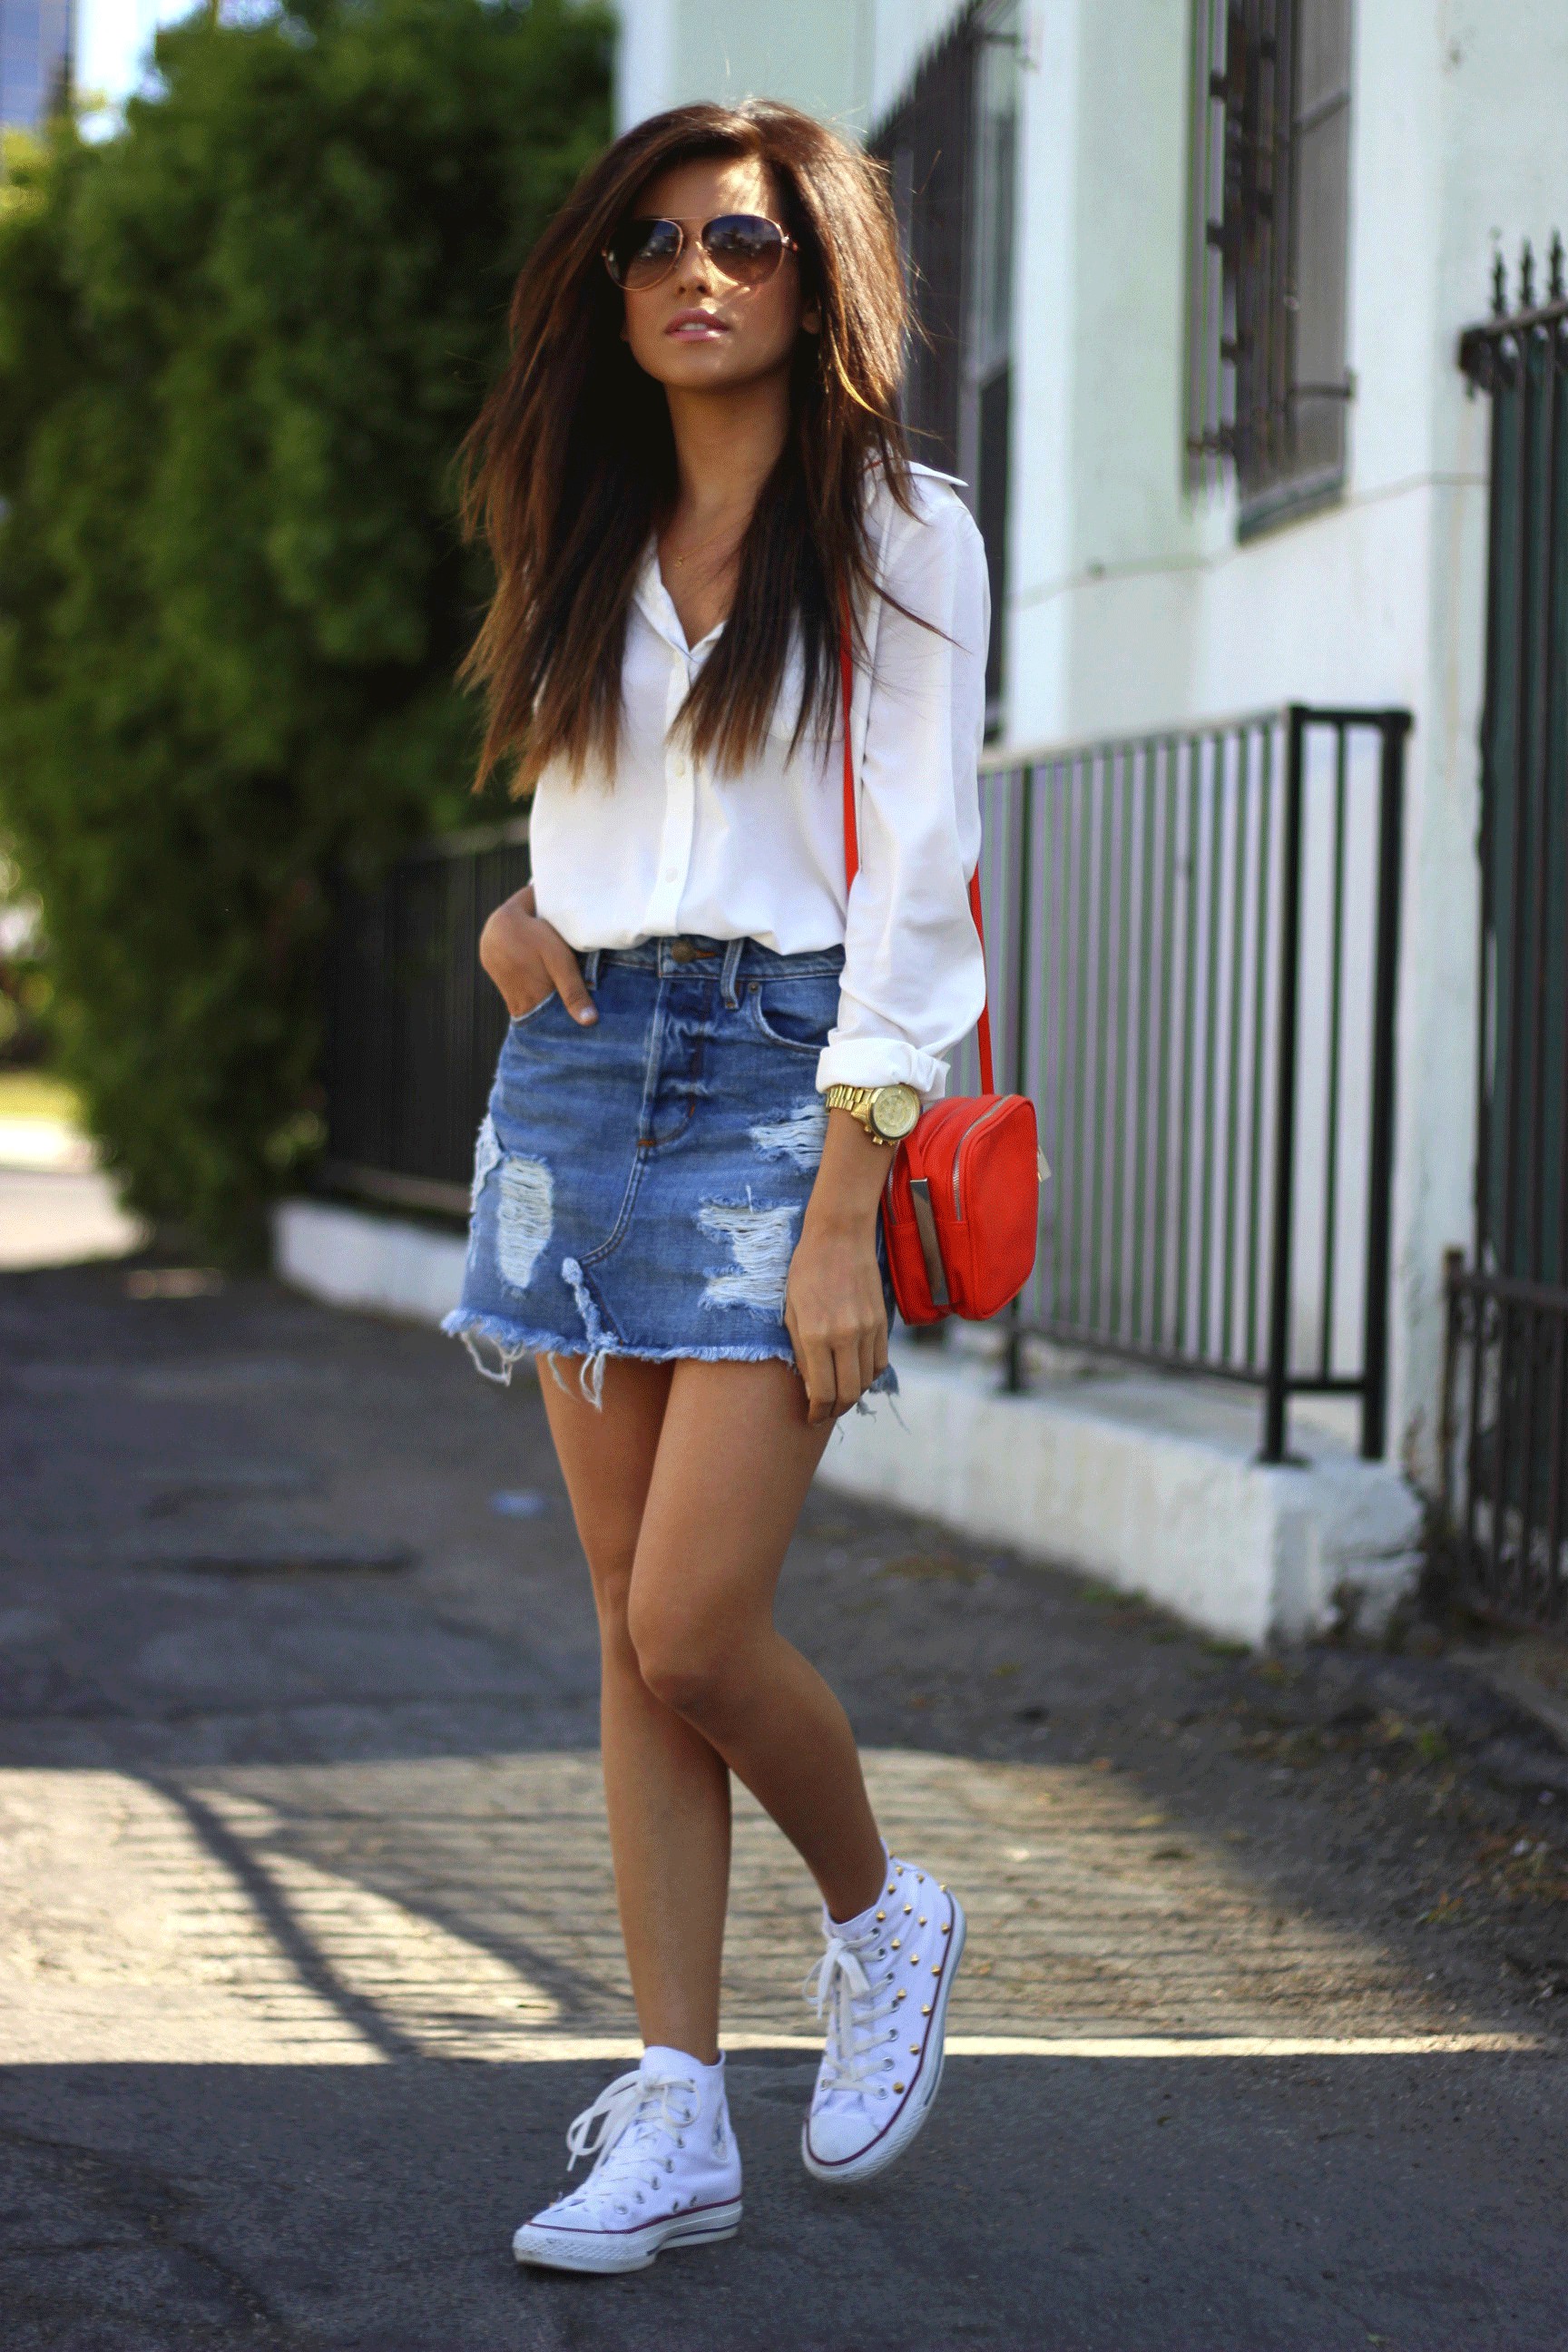 Denim skirt outfit with converse | Denim Skirt Outfits | Chuck Taylor ...